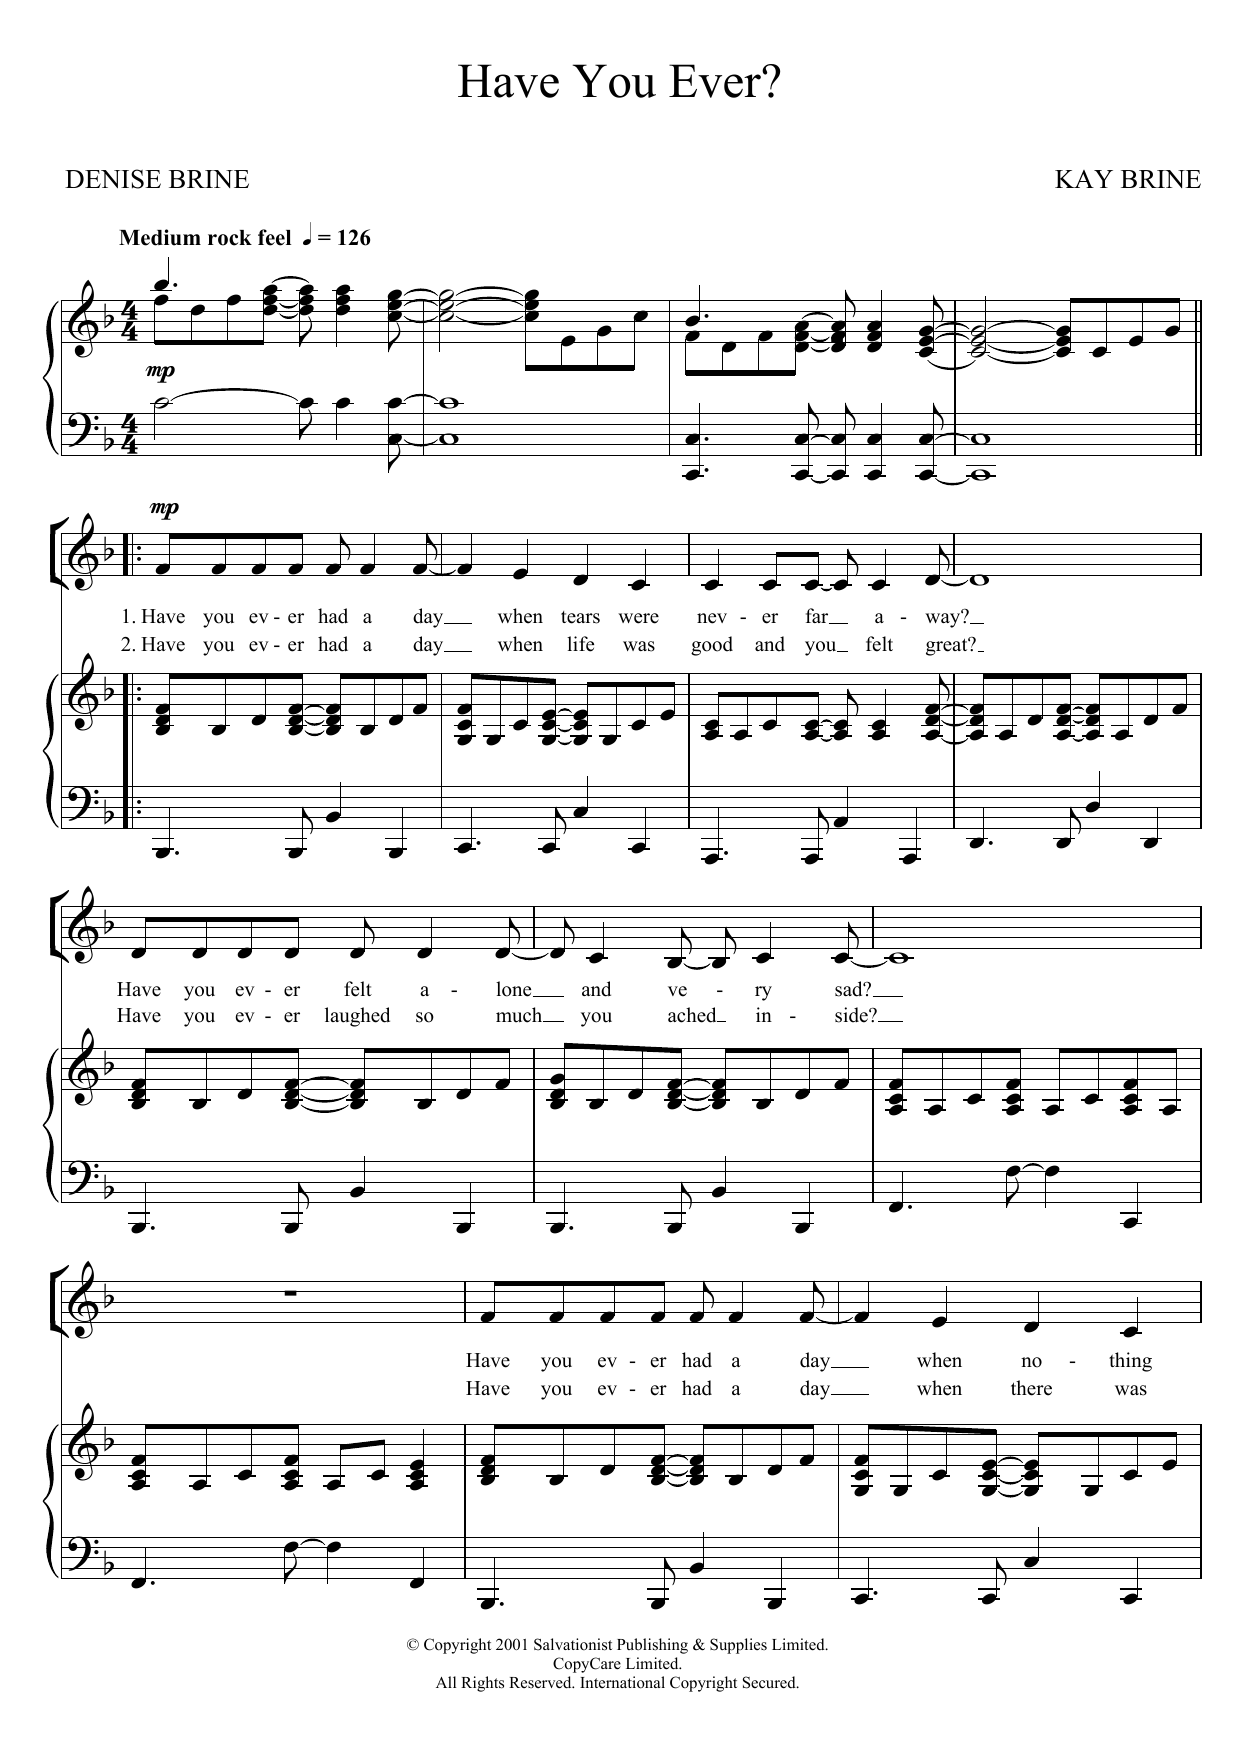 Download The Salvation Army Have You Ever? Sheet Music